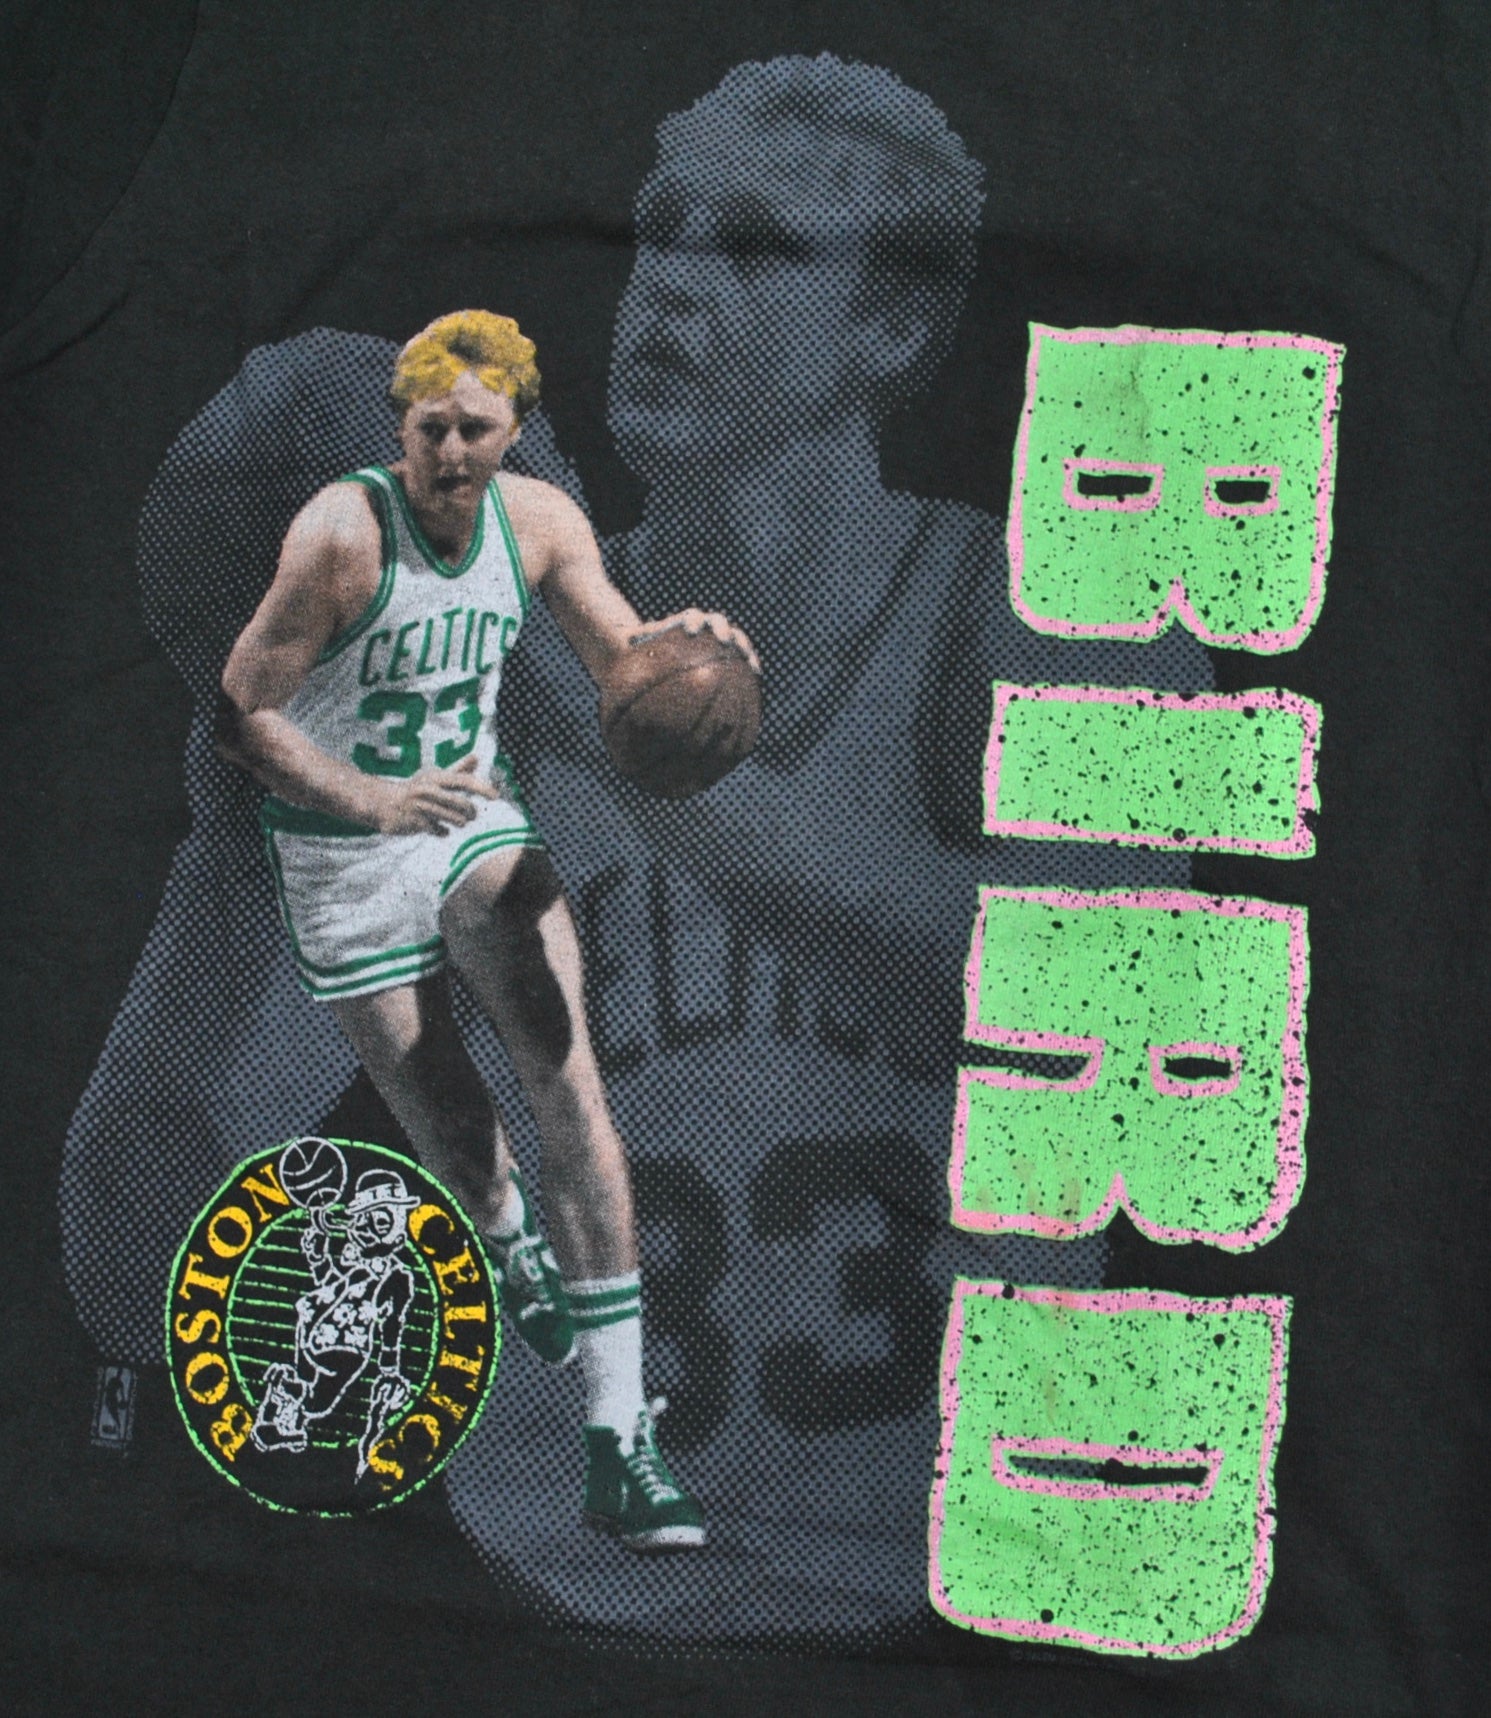  Green Larry Bird AIR Tank Top Adult Small : Clothing